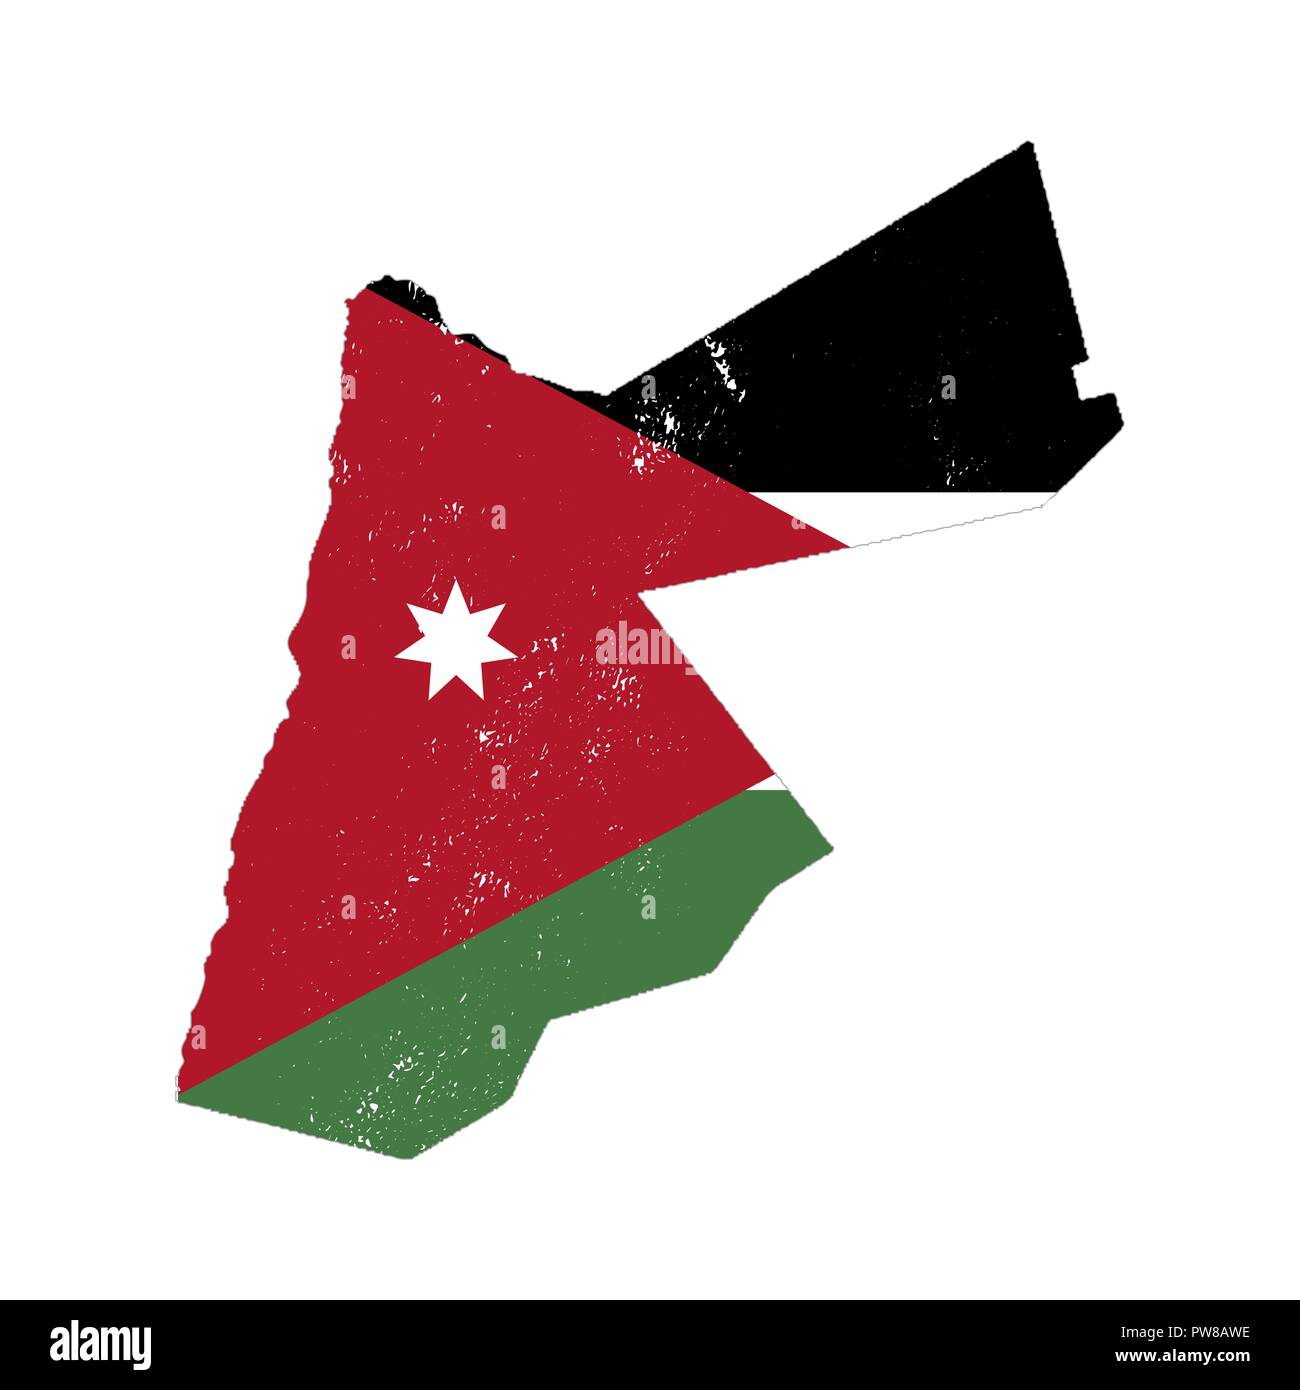 Jordan country silhouette flag on background, isolated on white Image & Art - Alamy